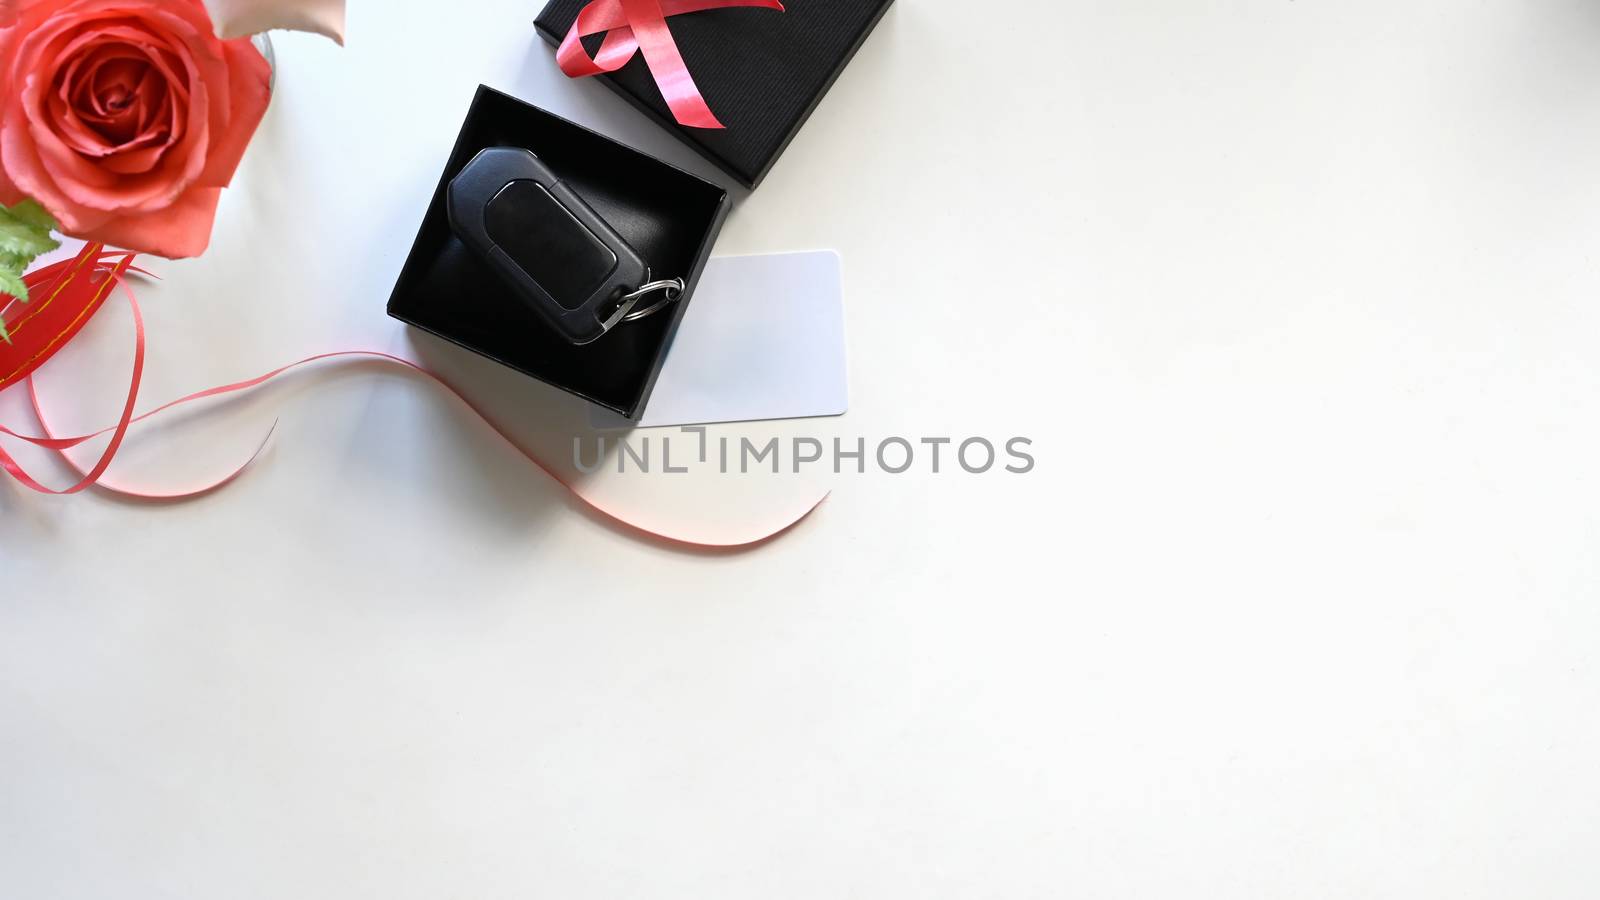 Top view Digital car key putting inside the black gift box with red ribbon,bouquet of roses and wish card on the white desk as background. Surprising Valentine's Day gift concept.